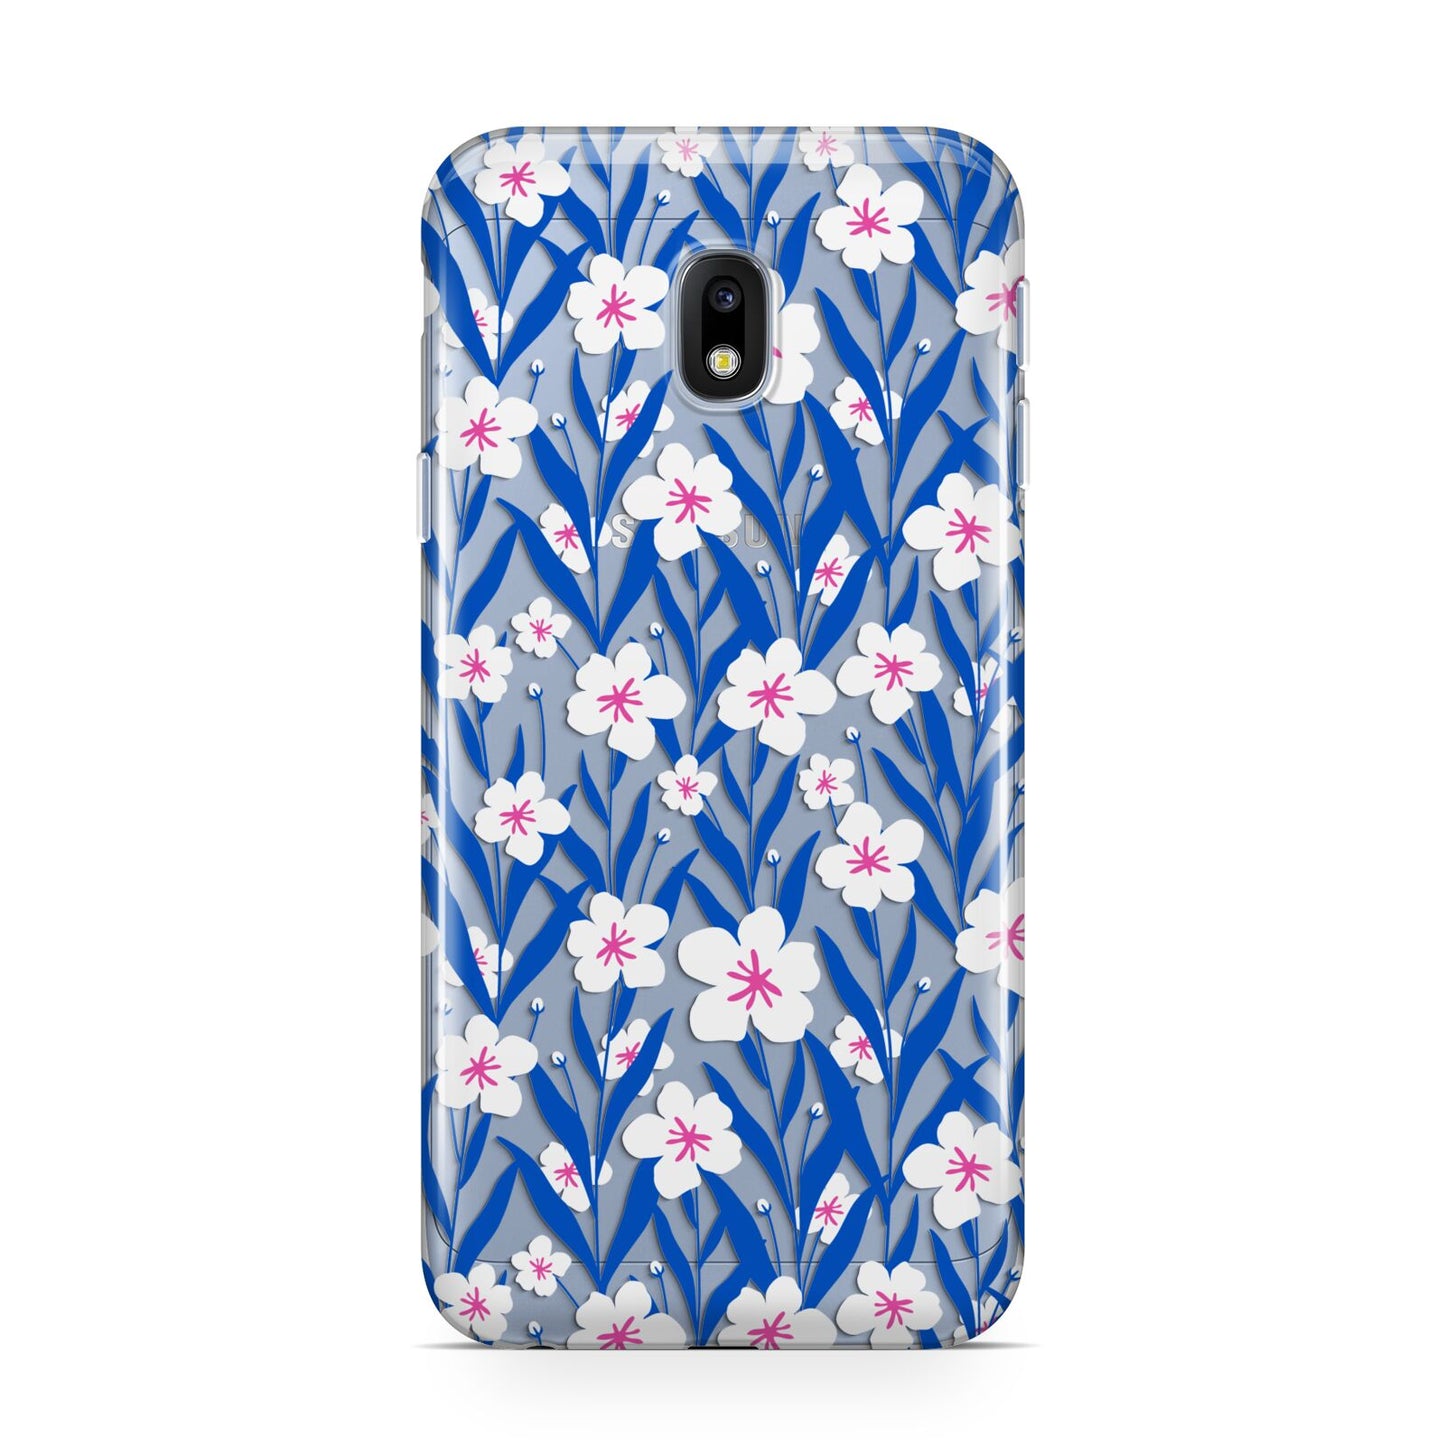 Blue and White Flowers Samsung Galaxy J3 2017 Case